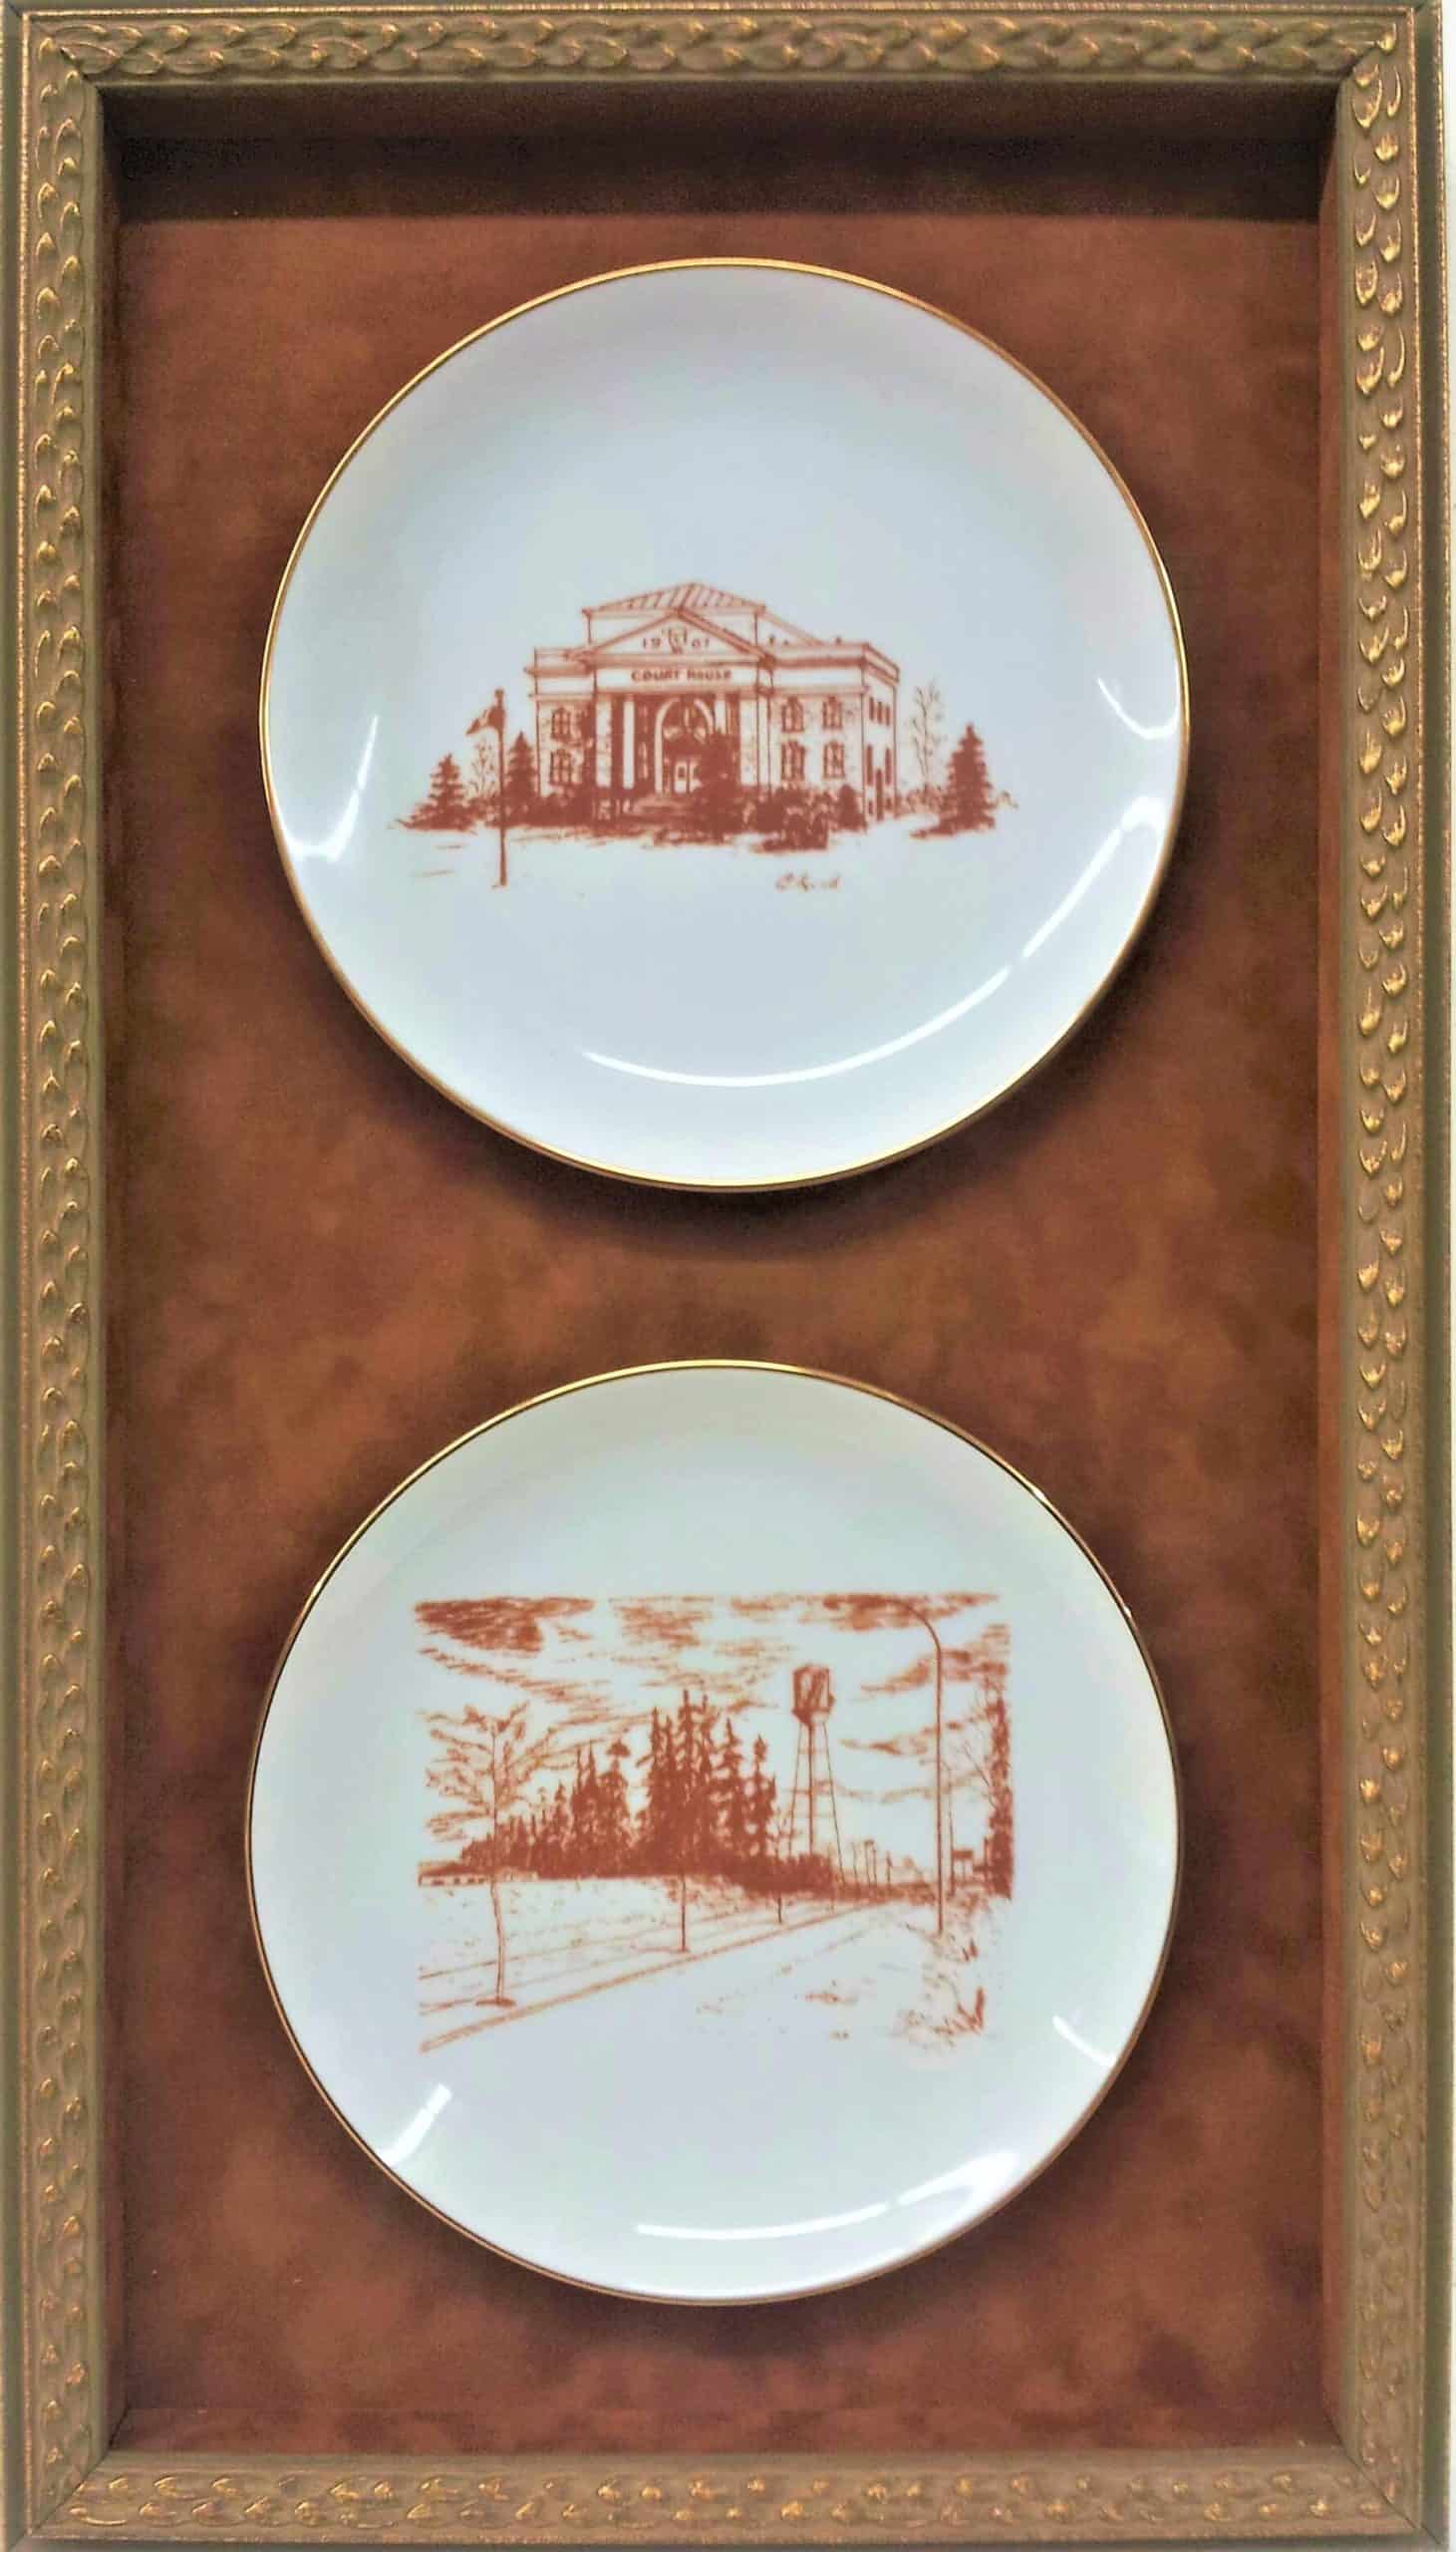 Two plates in a gold frame with a picture of a building.